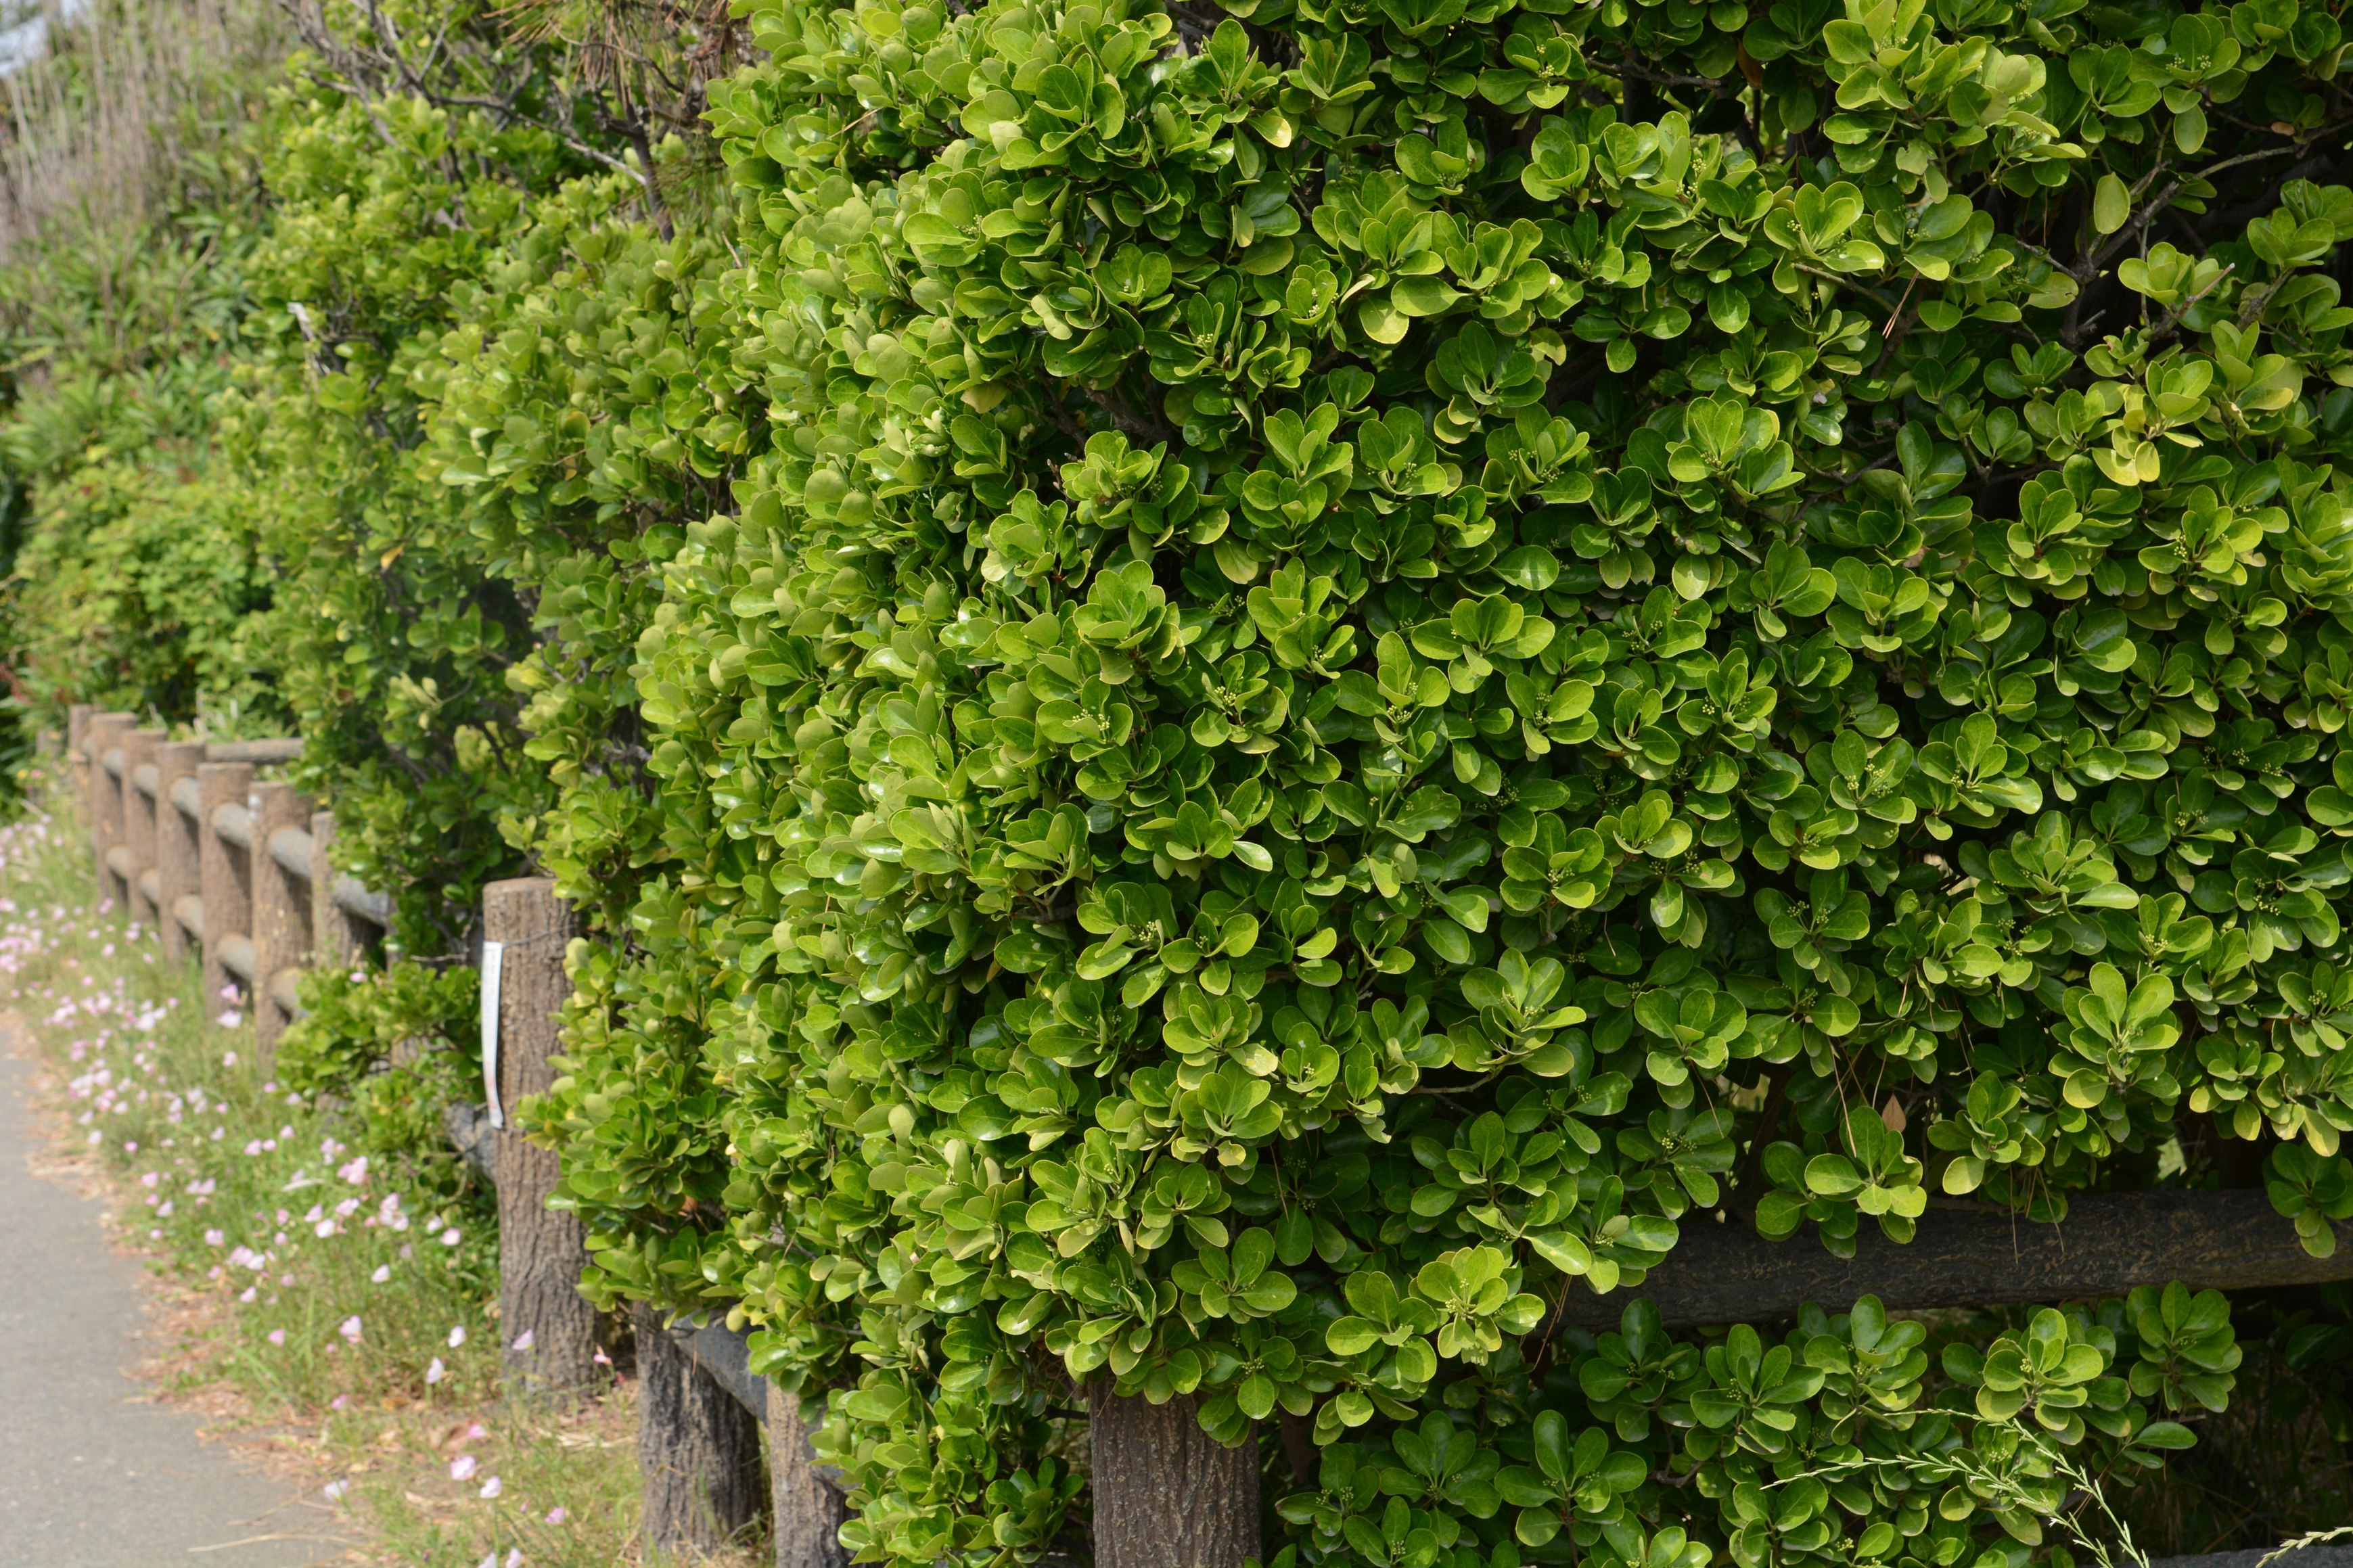 Euonymus japonica makes good hedging (iStock/PA)